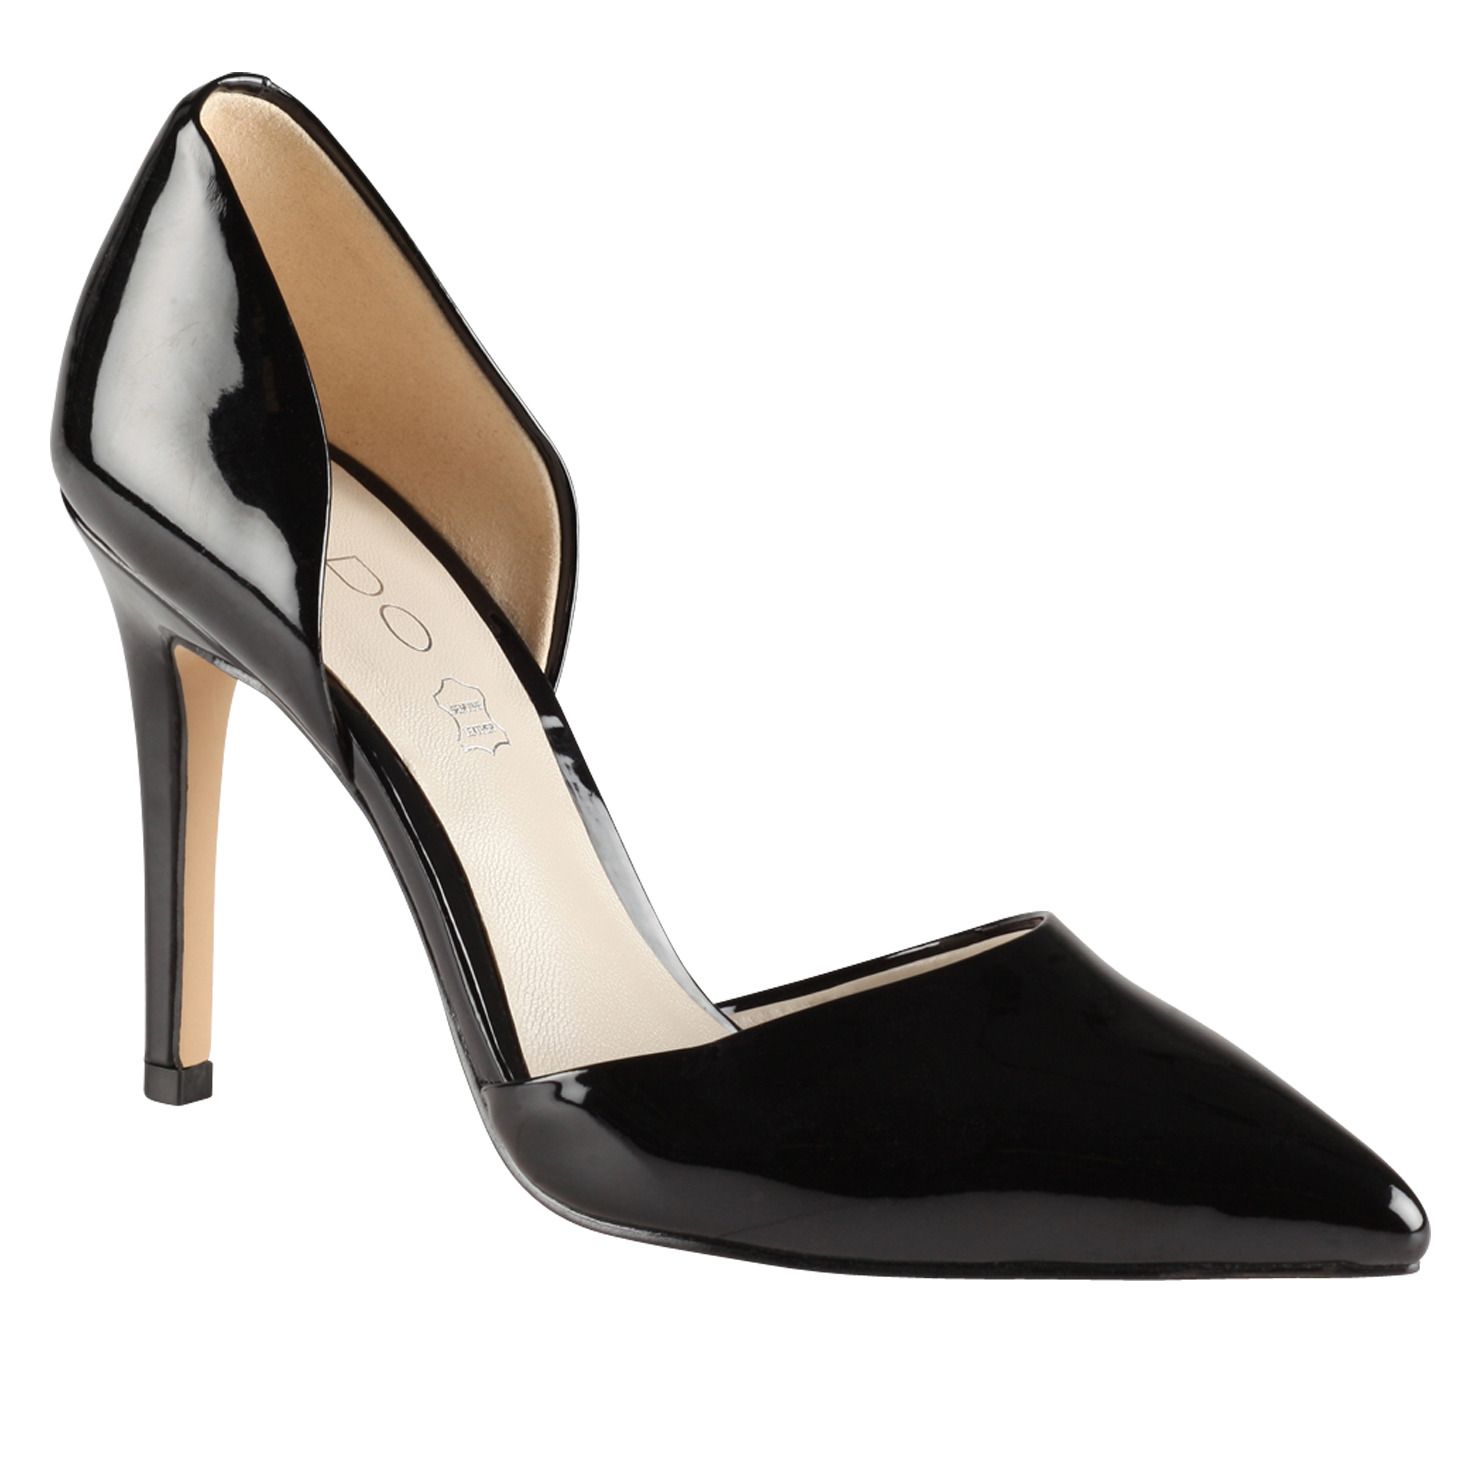 LIVERGNANO - women's high heels shoes for sale at ALDO Shoes. | well ...